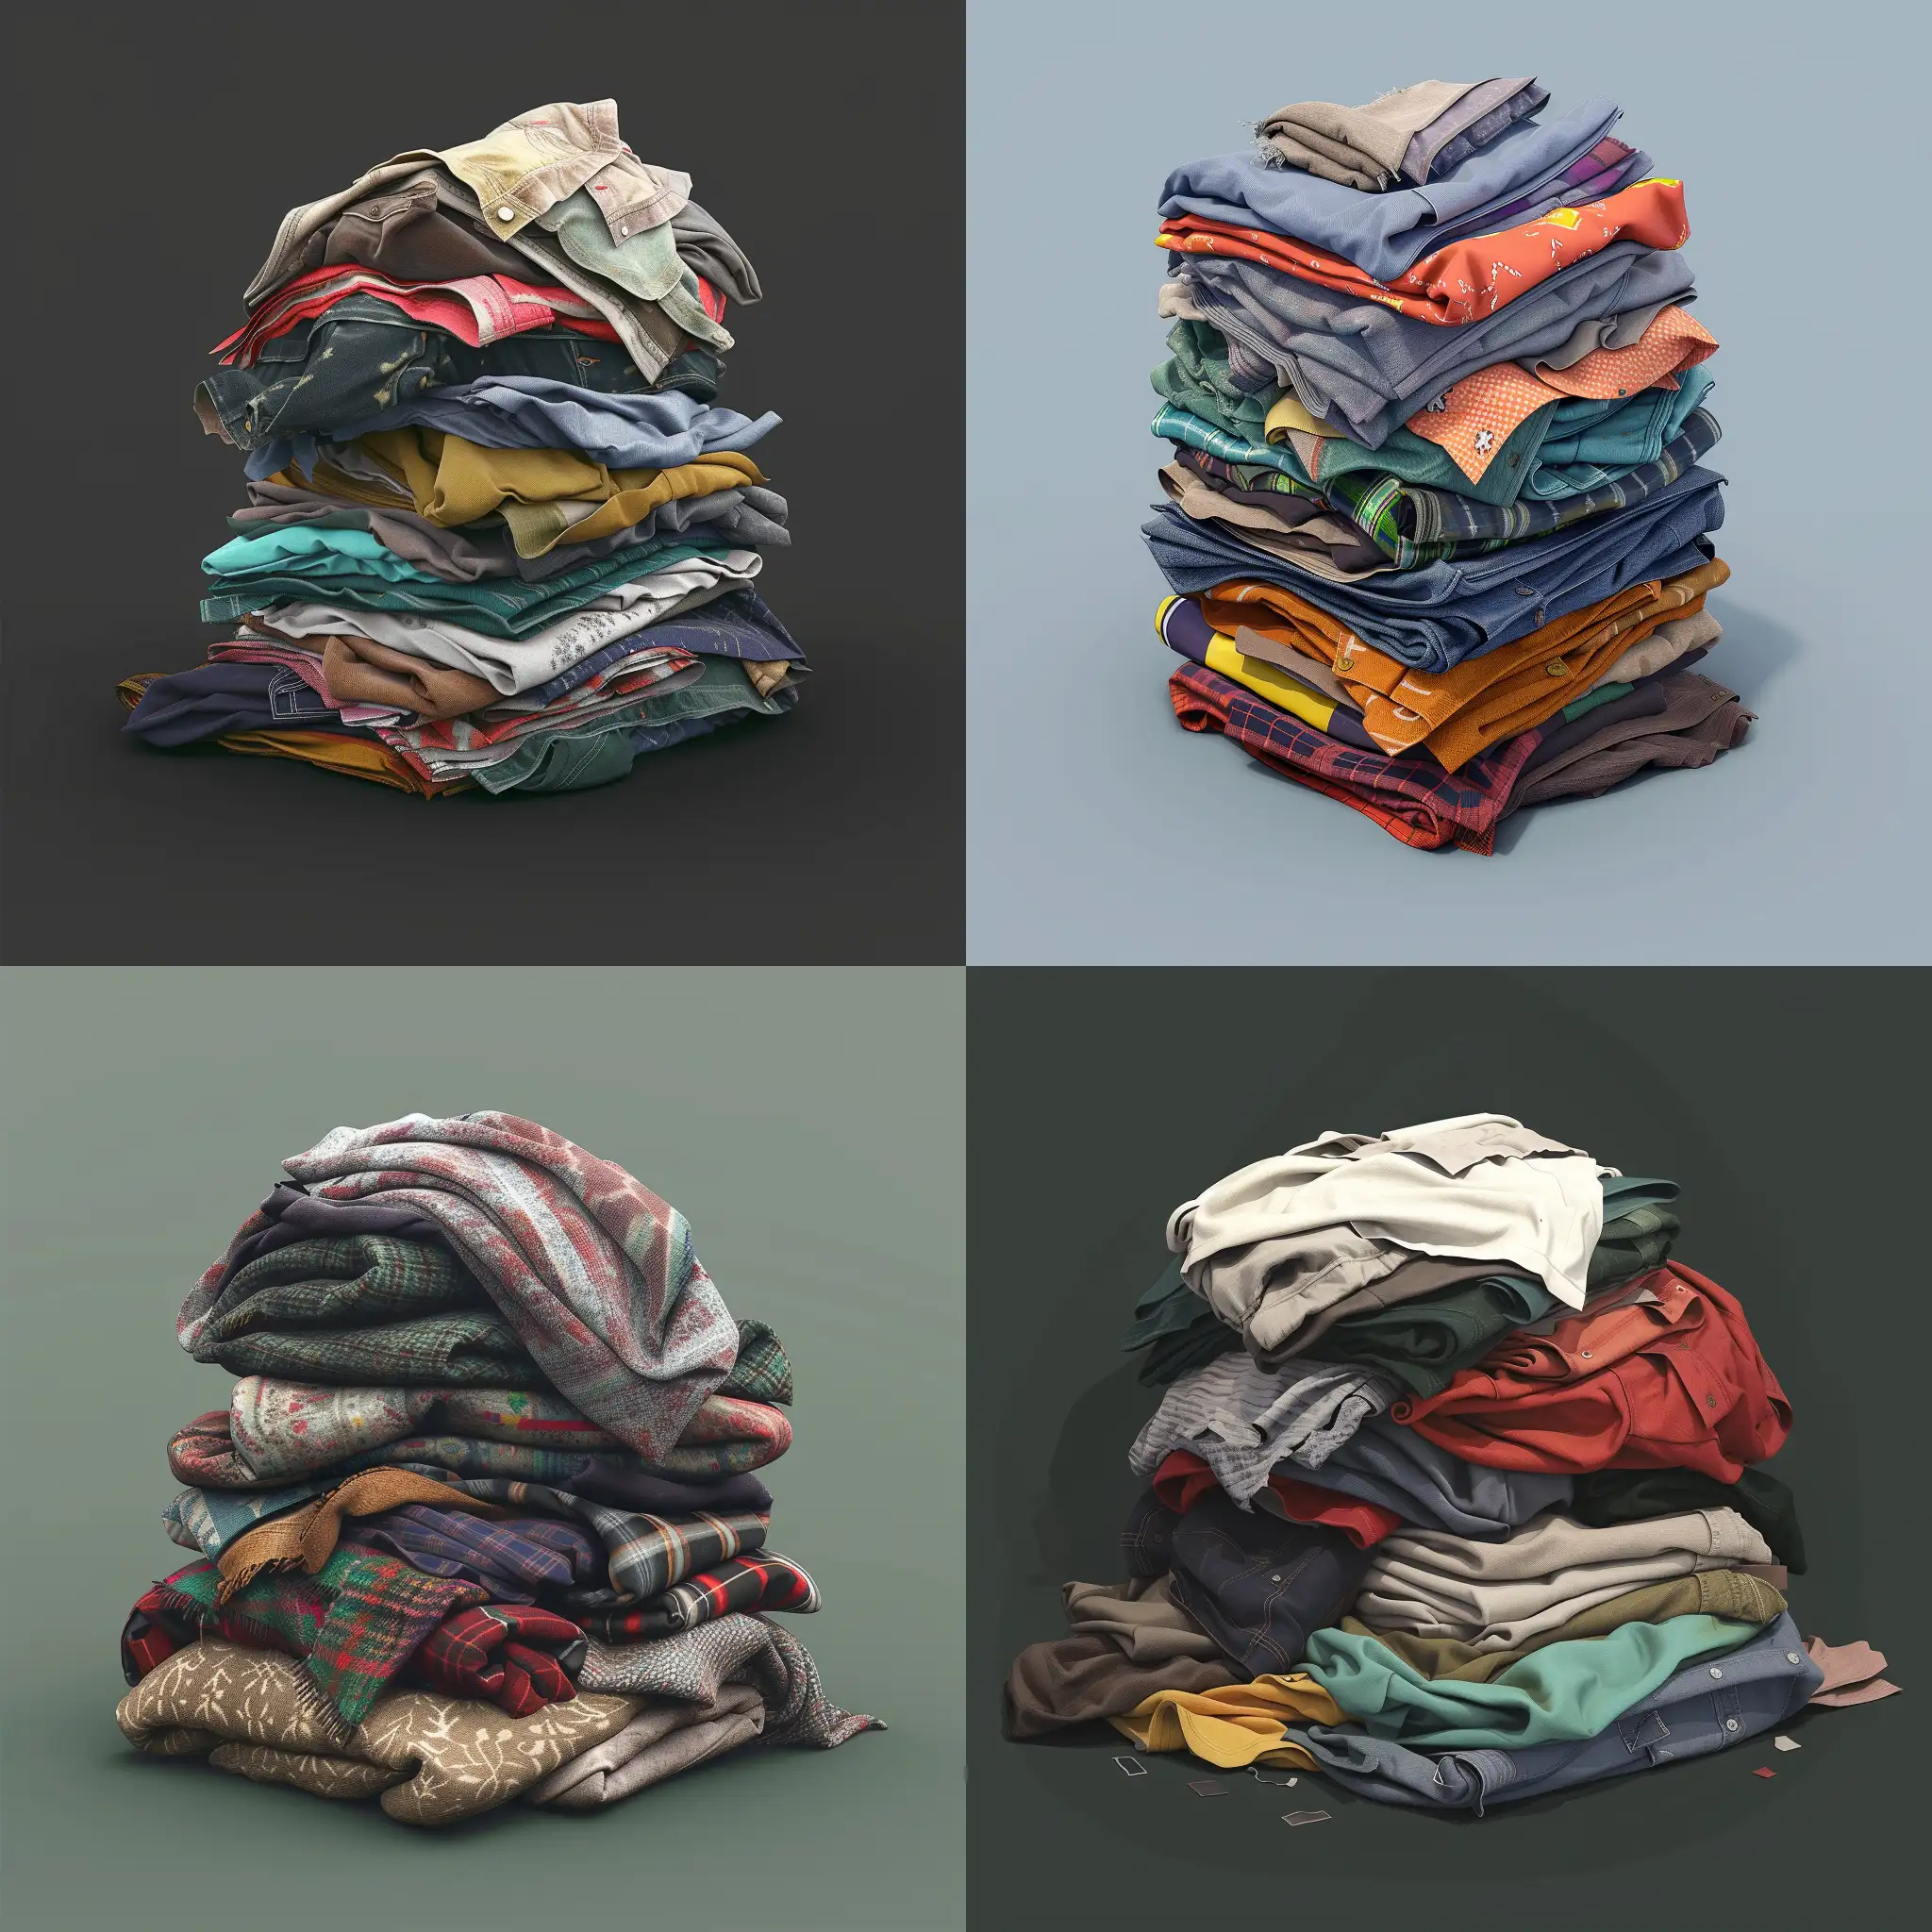 Isometric-Realistic-Old-Worn-Clothes-Pile-3D-Render-in-Stalker-Style